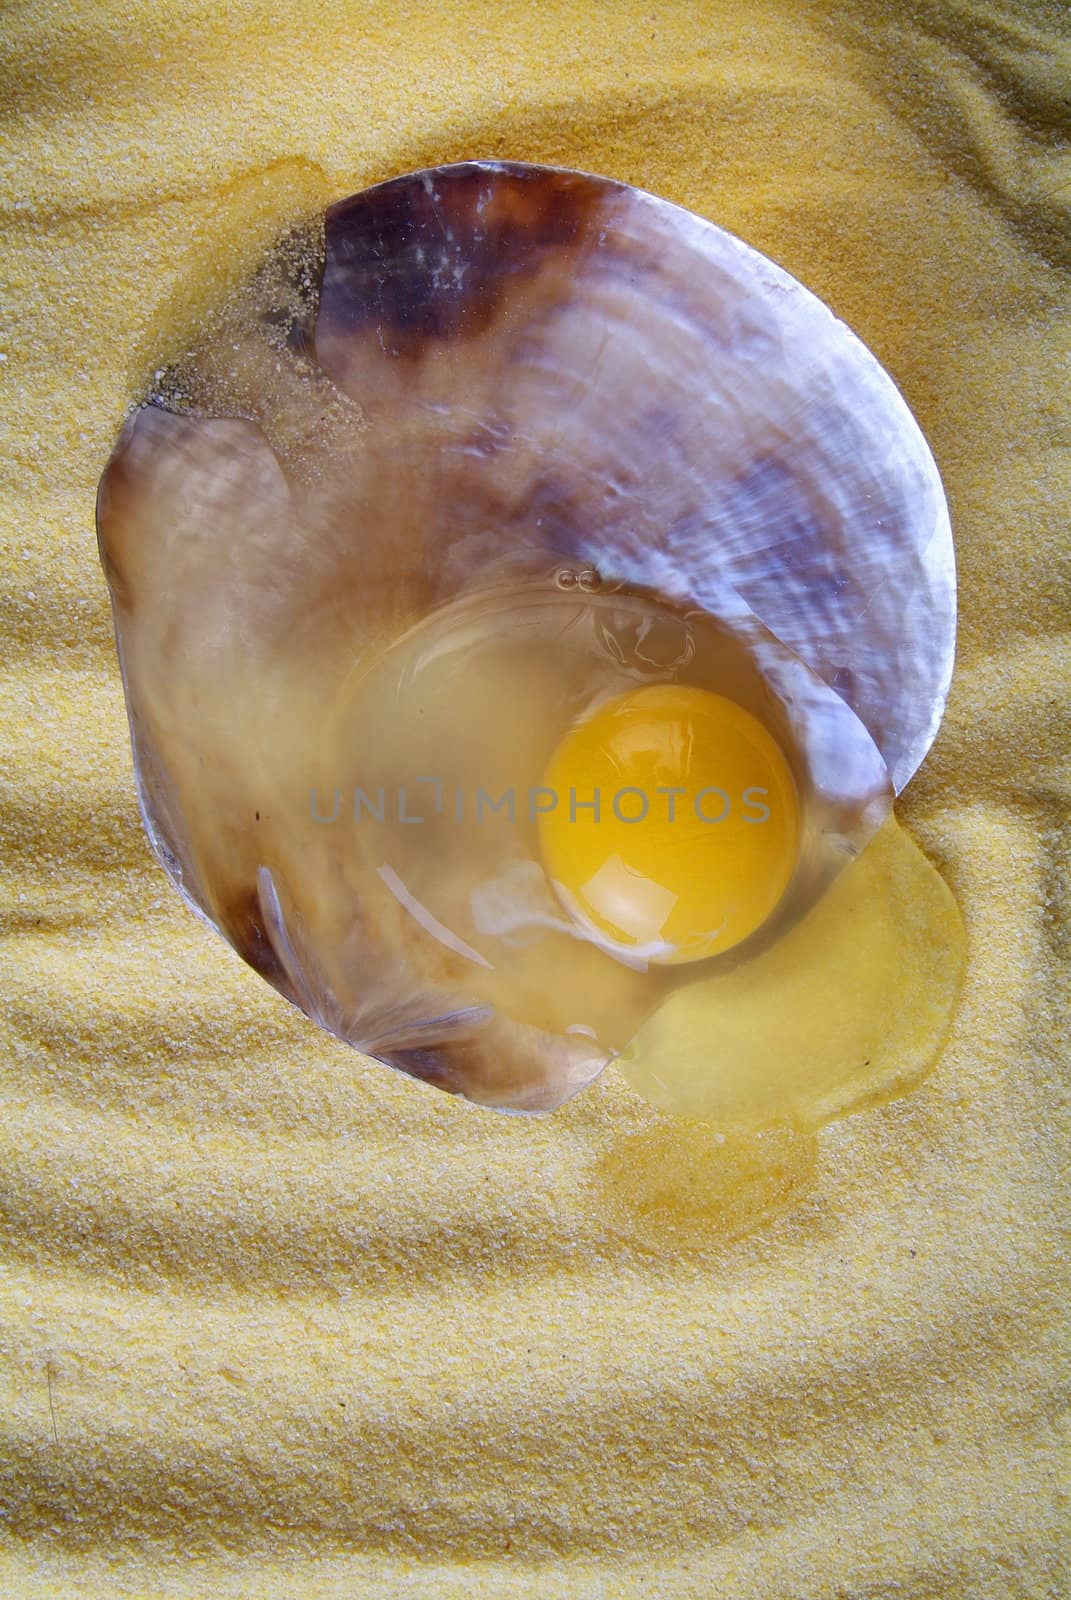 Raw egg isolated on sand background, inside a seashell